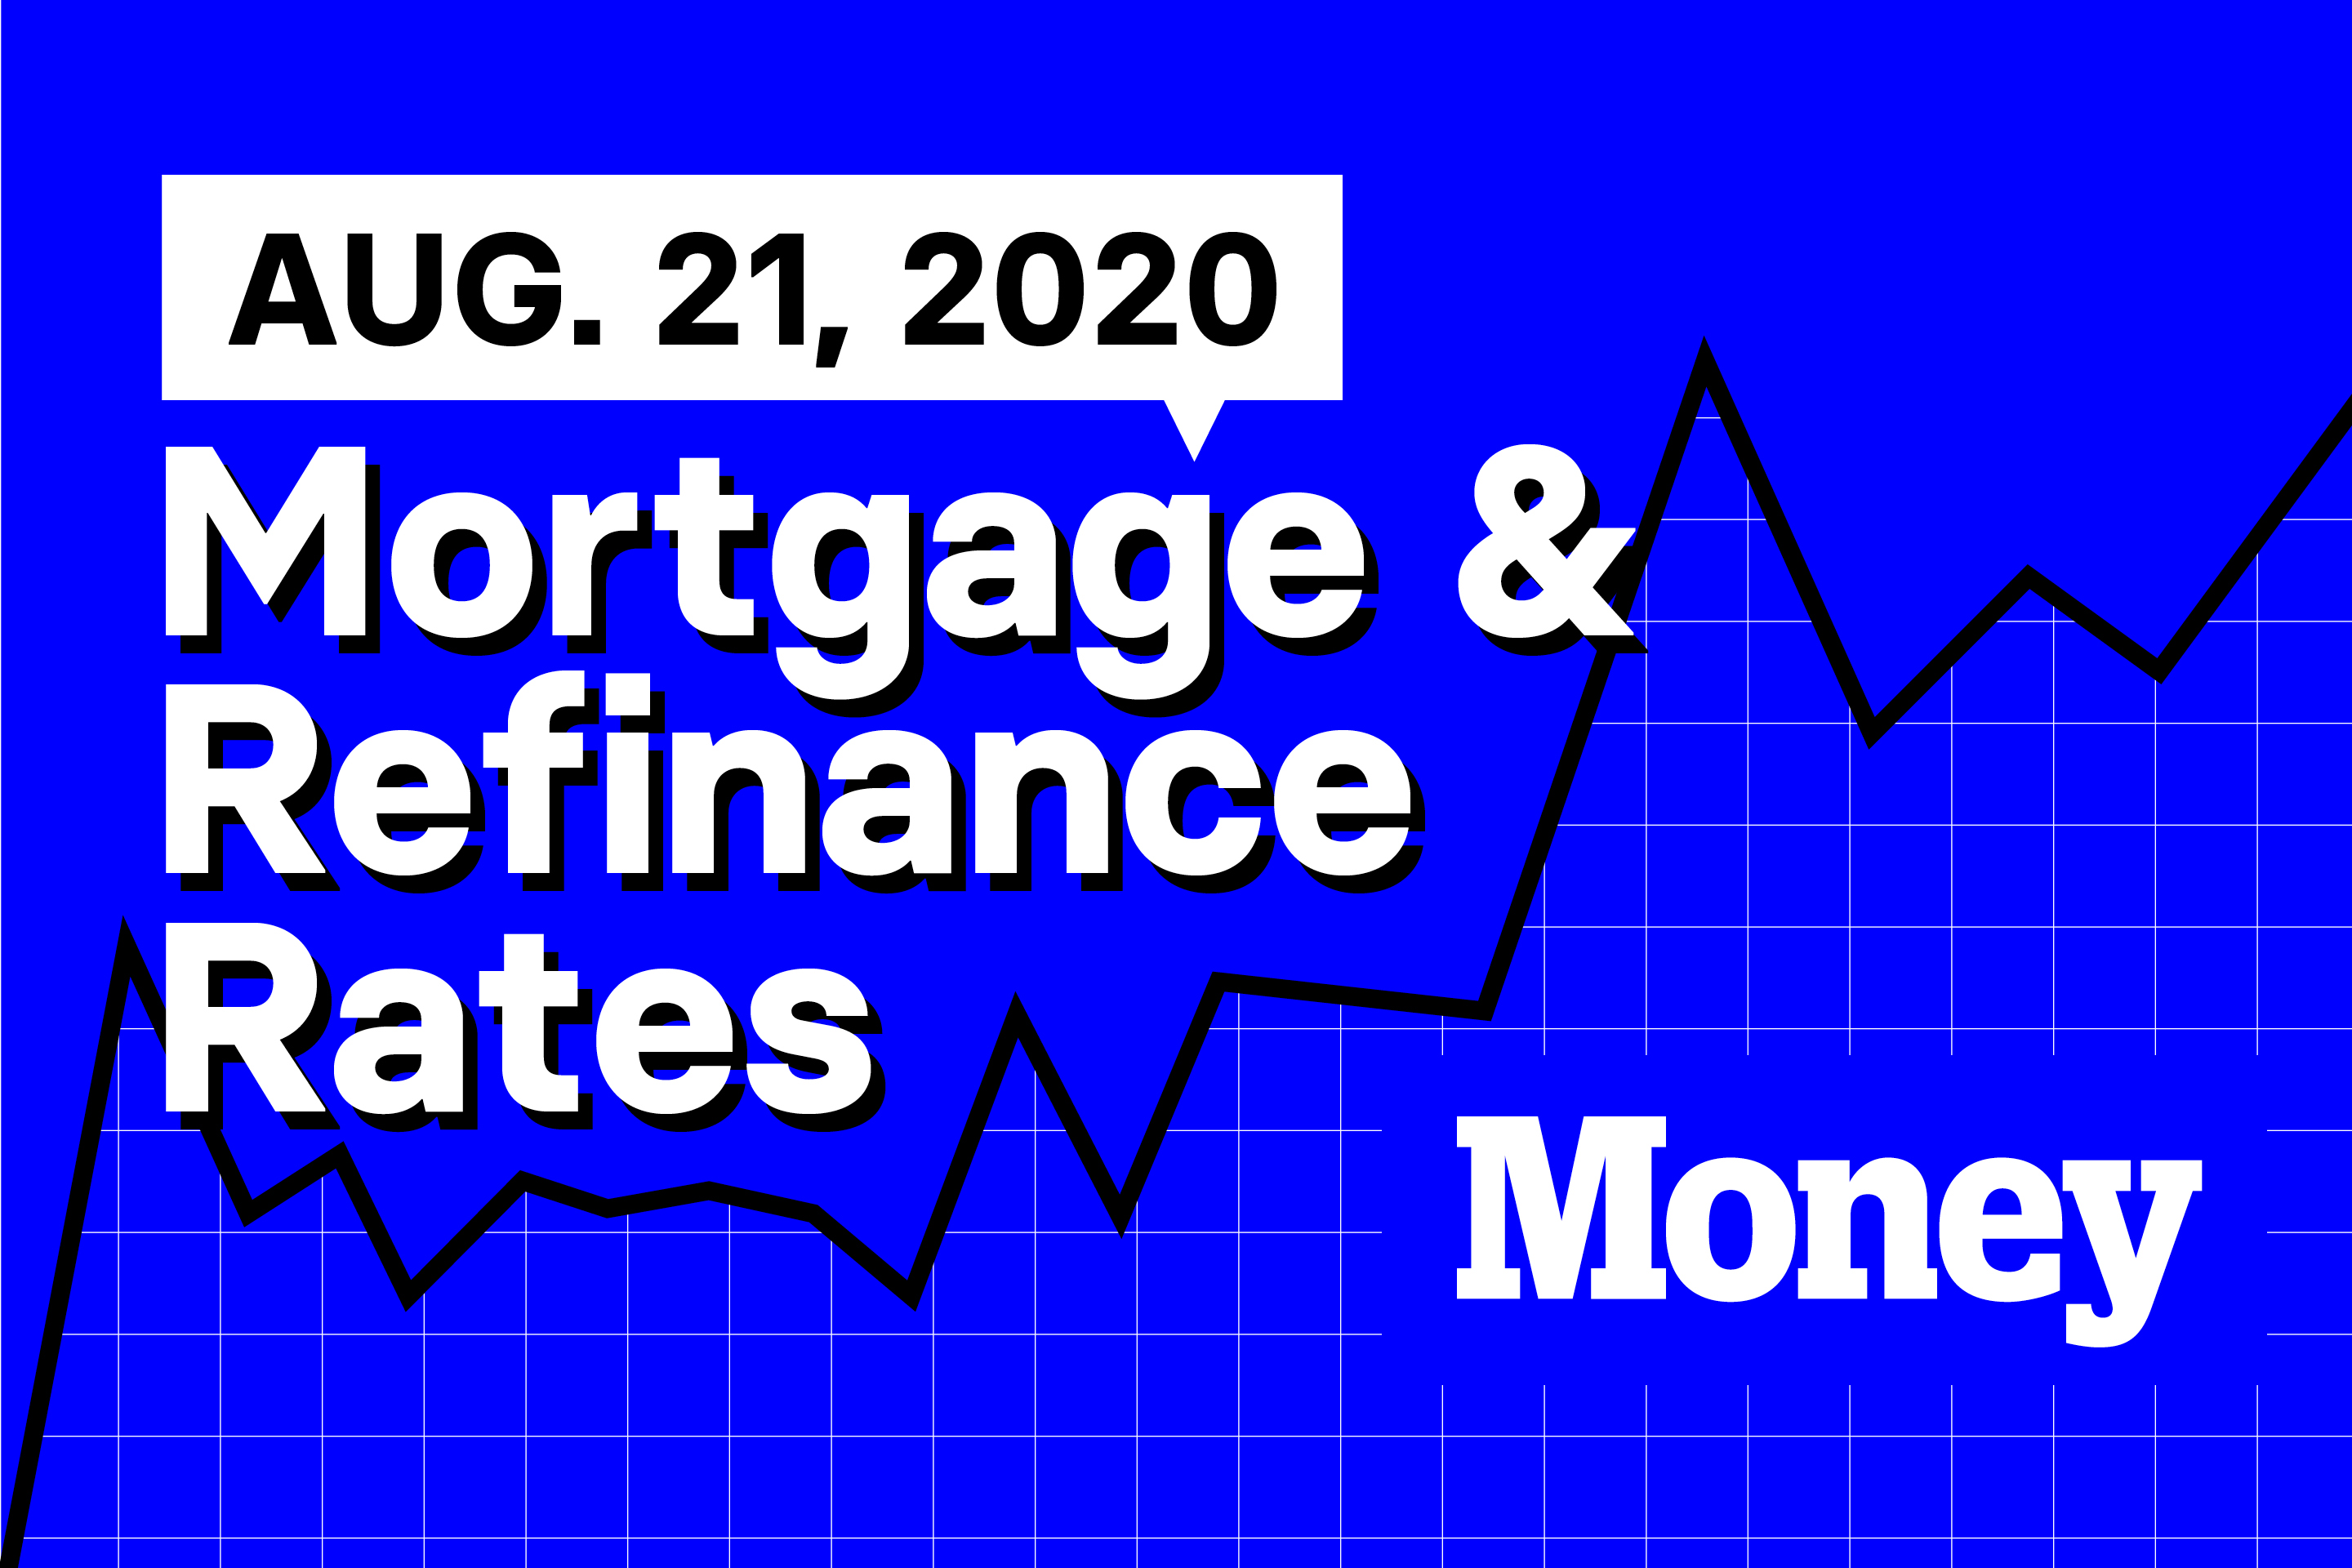 Here Are Today's Best Mortgage & Refinance Rates for August 21, 2020